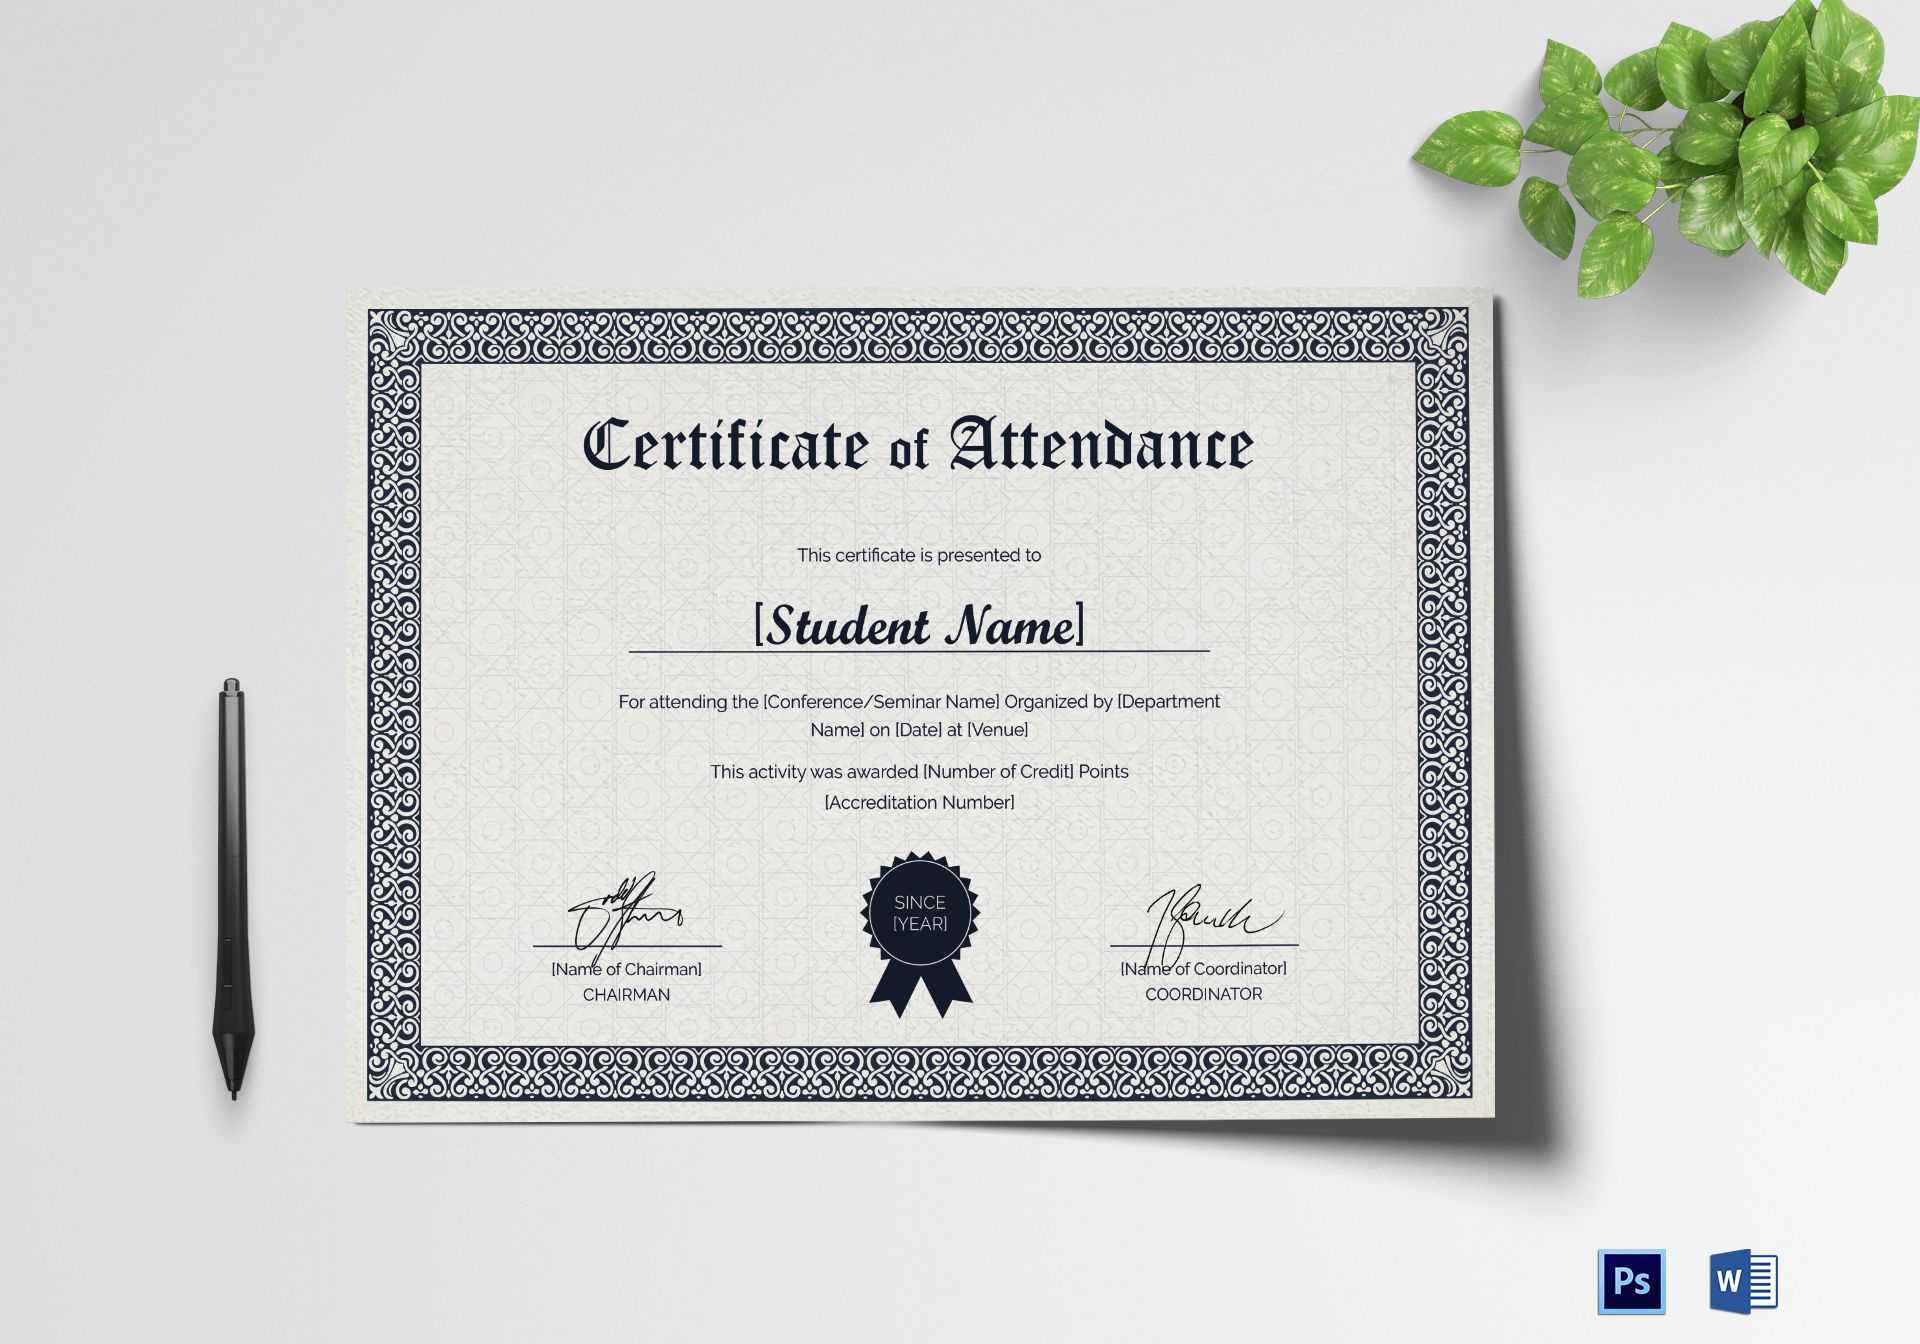 Students Attendance Certificate Template In Certificate Of Attendance Conference Template